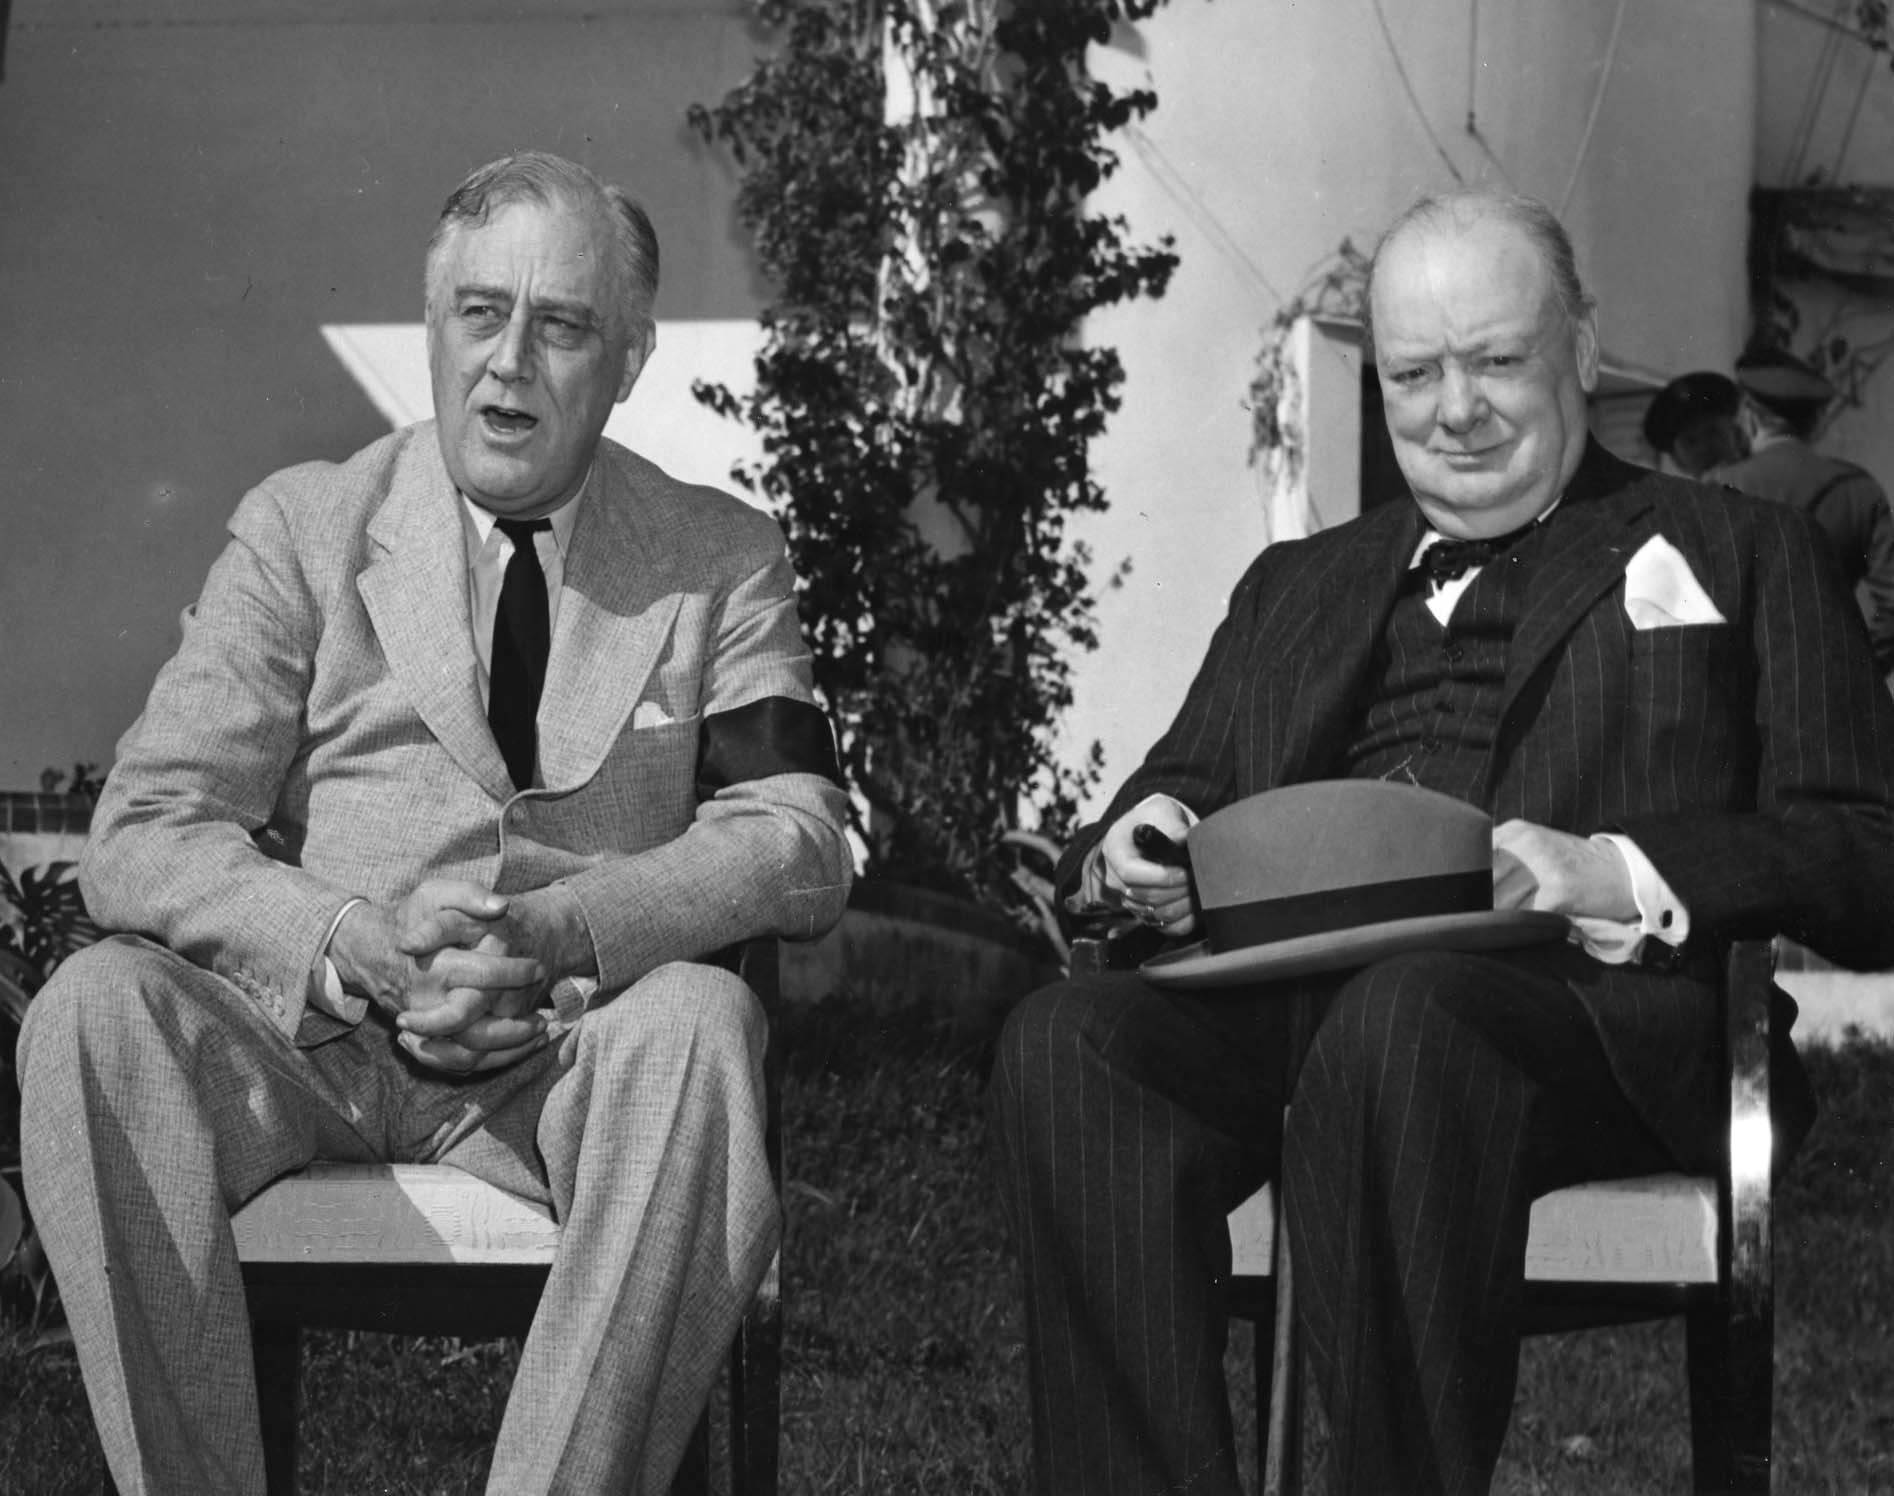 Franklin Roosevelt and Winston Churchill in Casablanca, French Morocco during the Casablanca Conference, 24 Jan 1943 (US Army Signal Corps photo)